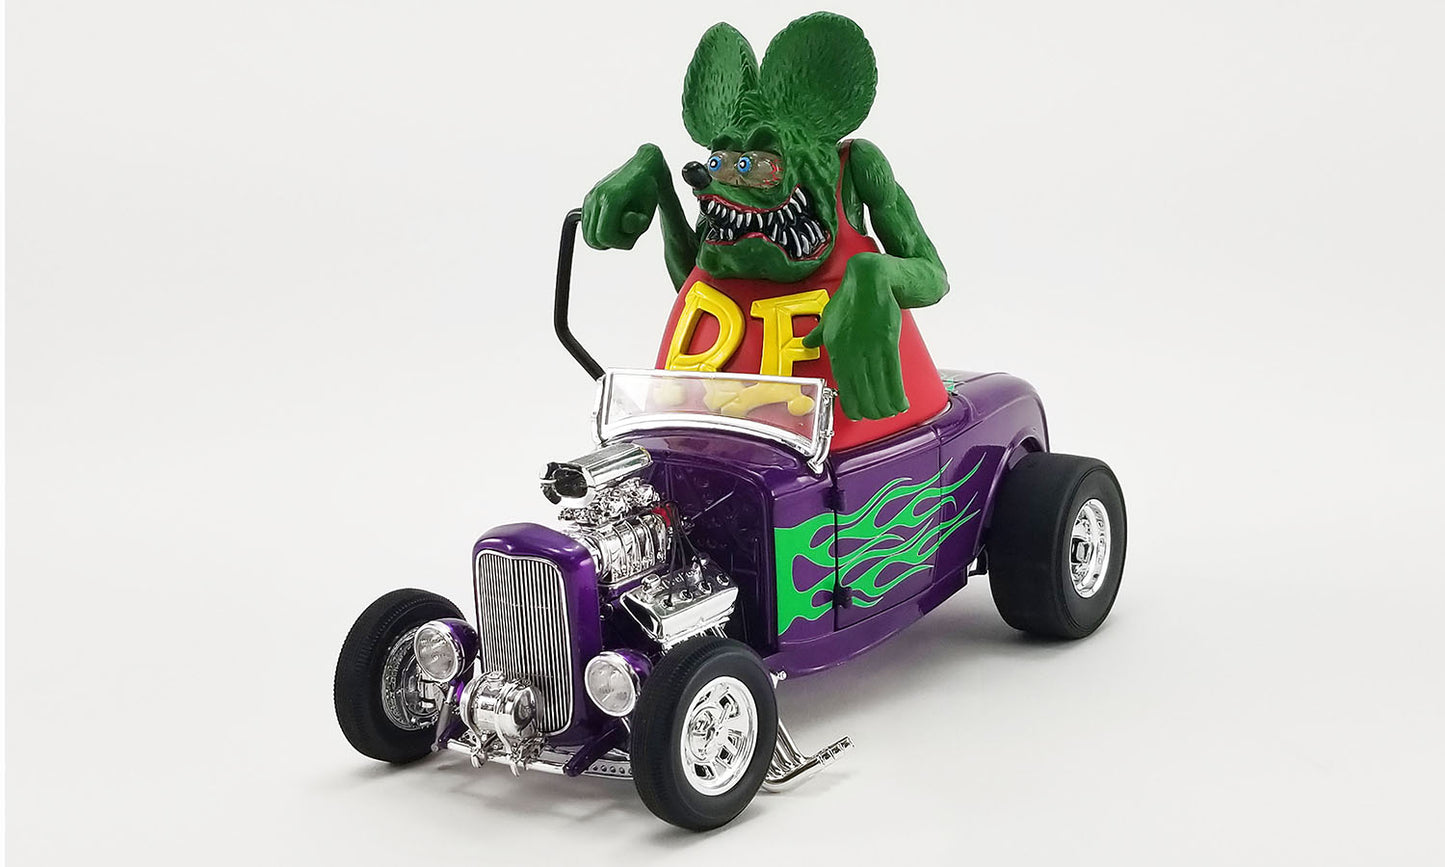 1932 Ford Blown Hot Rod Roadster with Rat Fink Figure 1:18 Acme